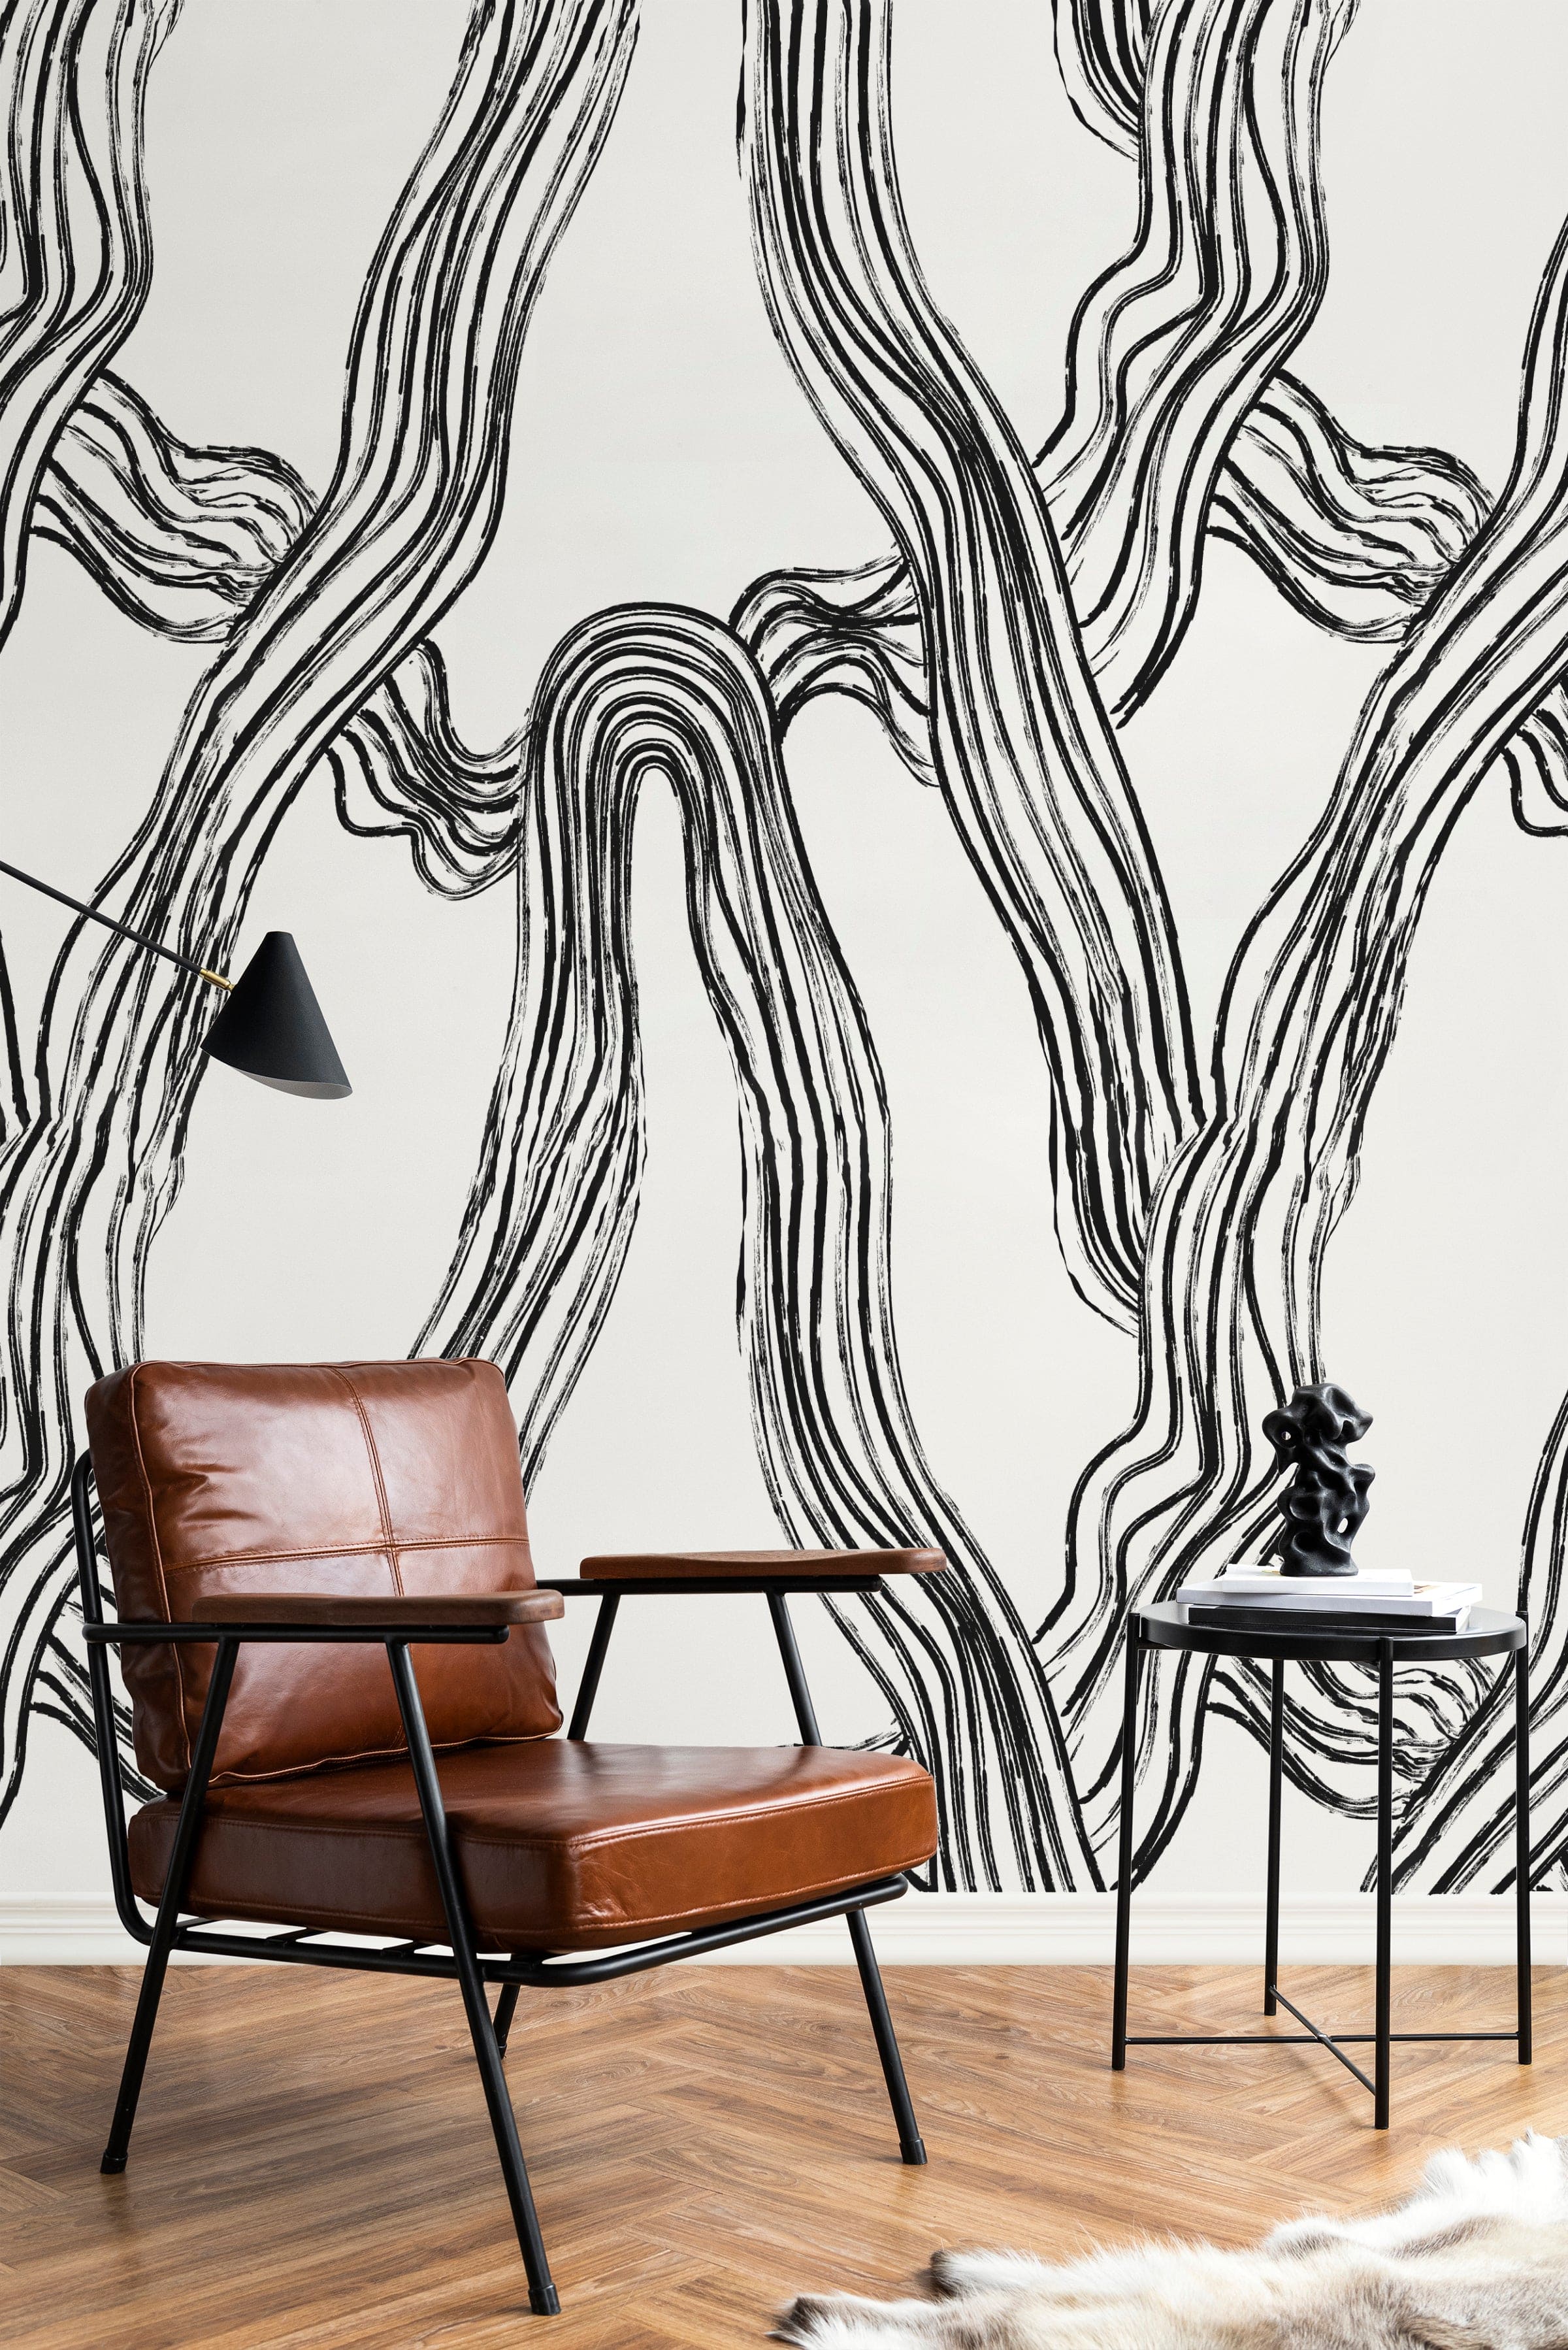 Chic interior design with a vintage leather chair against a backdrop of abstract flowing lines wallpaper in black and white. The space is accented by a minimalist side table and a small sculpture, enhancing the artistic flair of the room.